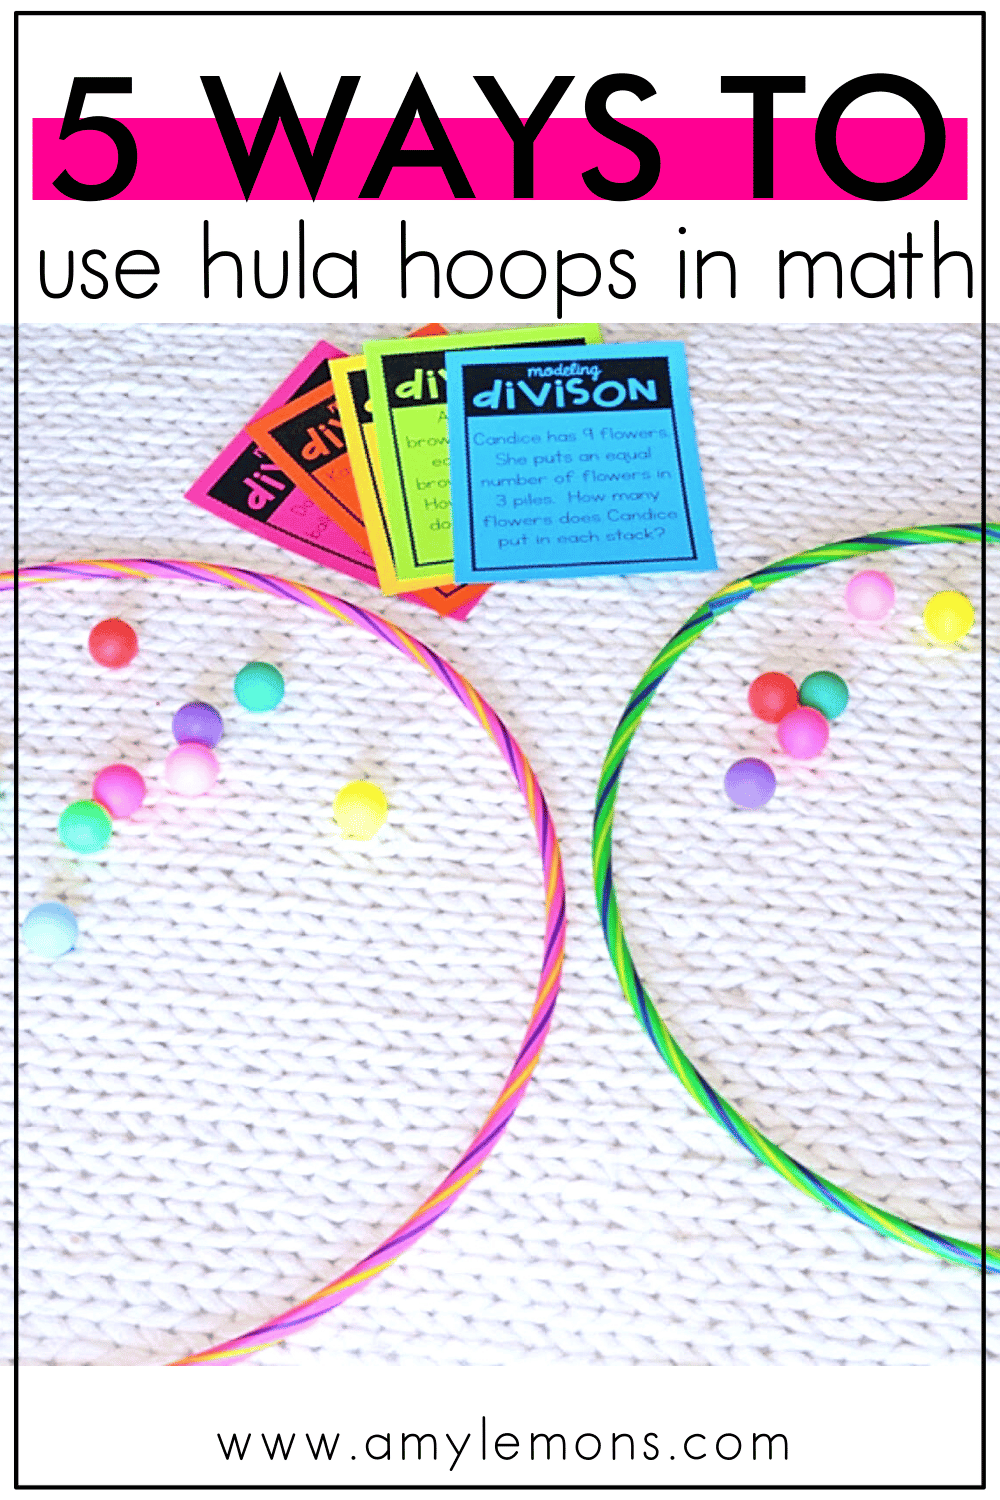 5 Math Games Every Classroom Needs to Play